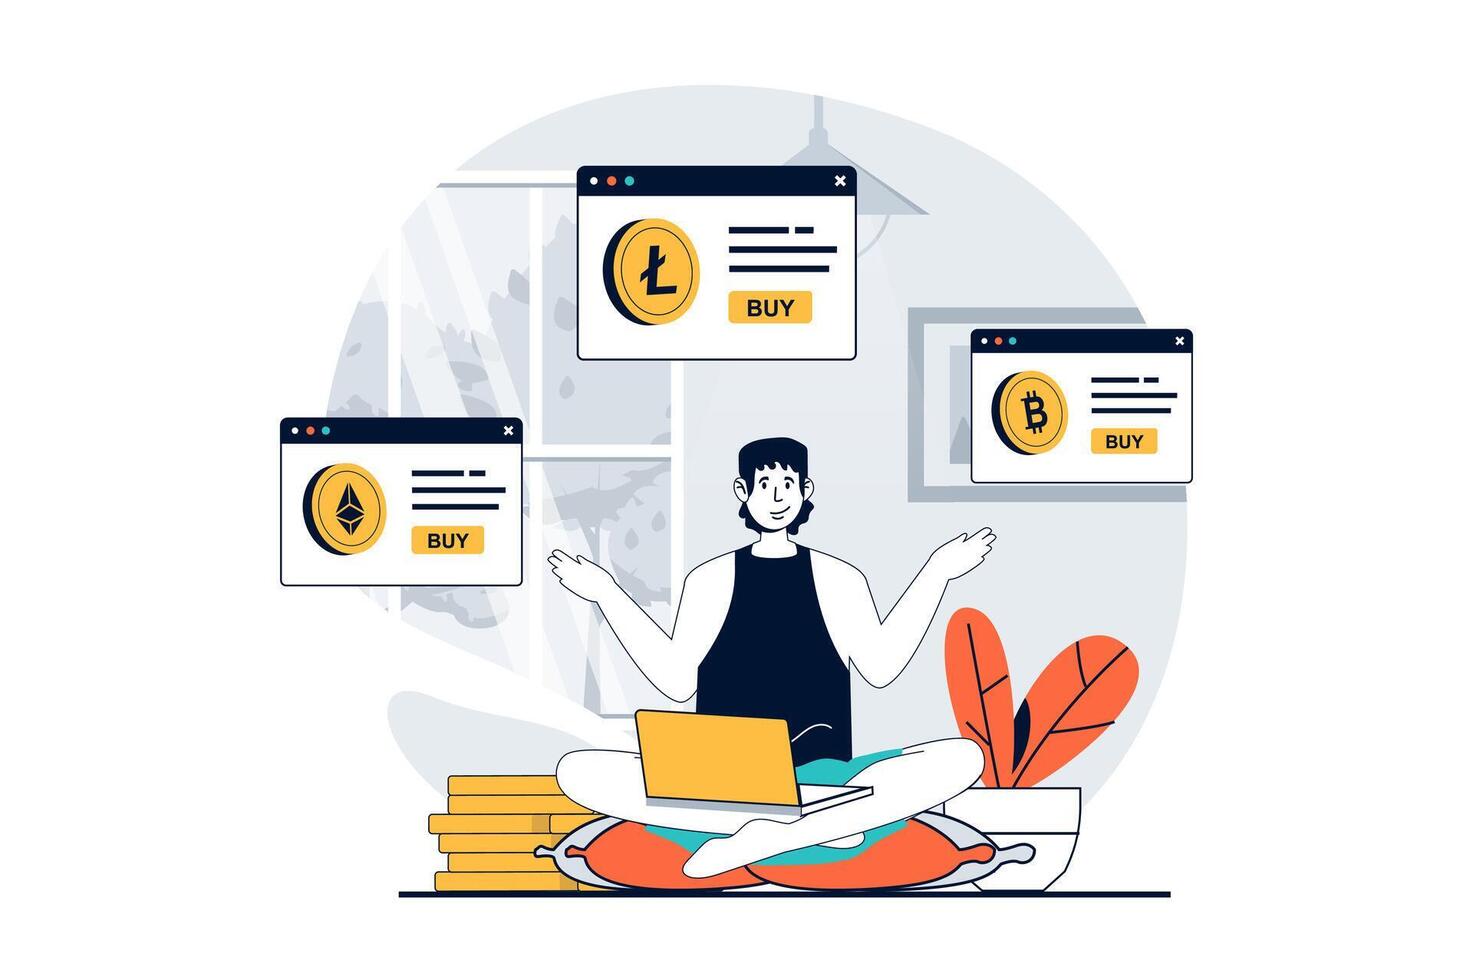 Cryptocurrency marketplace concept with people scene in flat design for web. Man buying different crypto coins for digital wallets. Vector illustration for social media banner, marketing material.